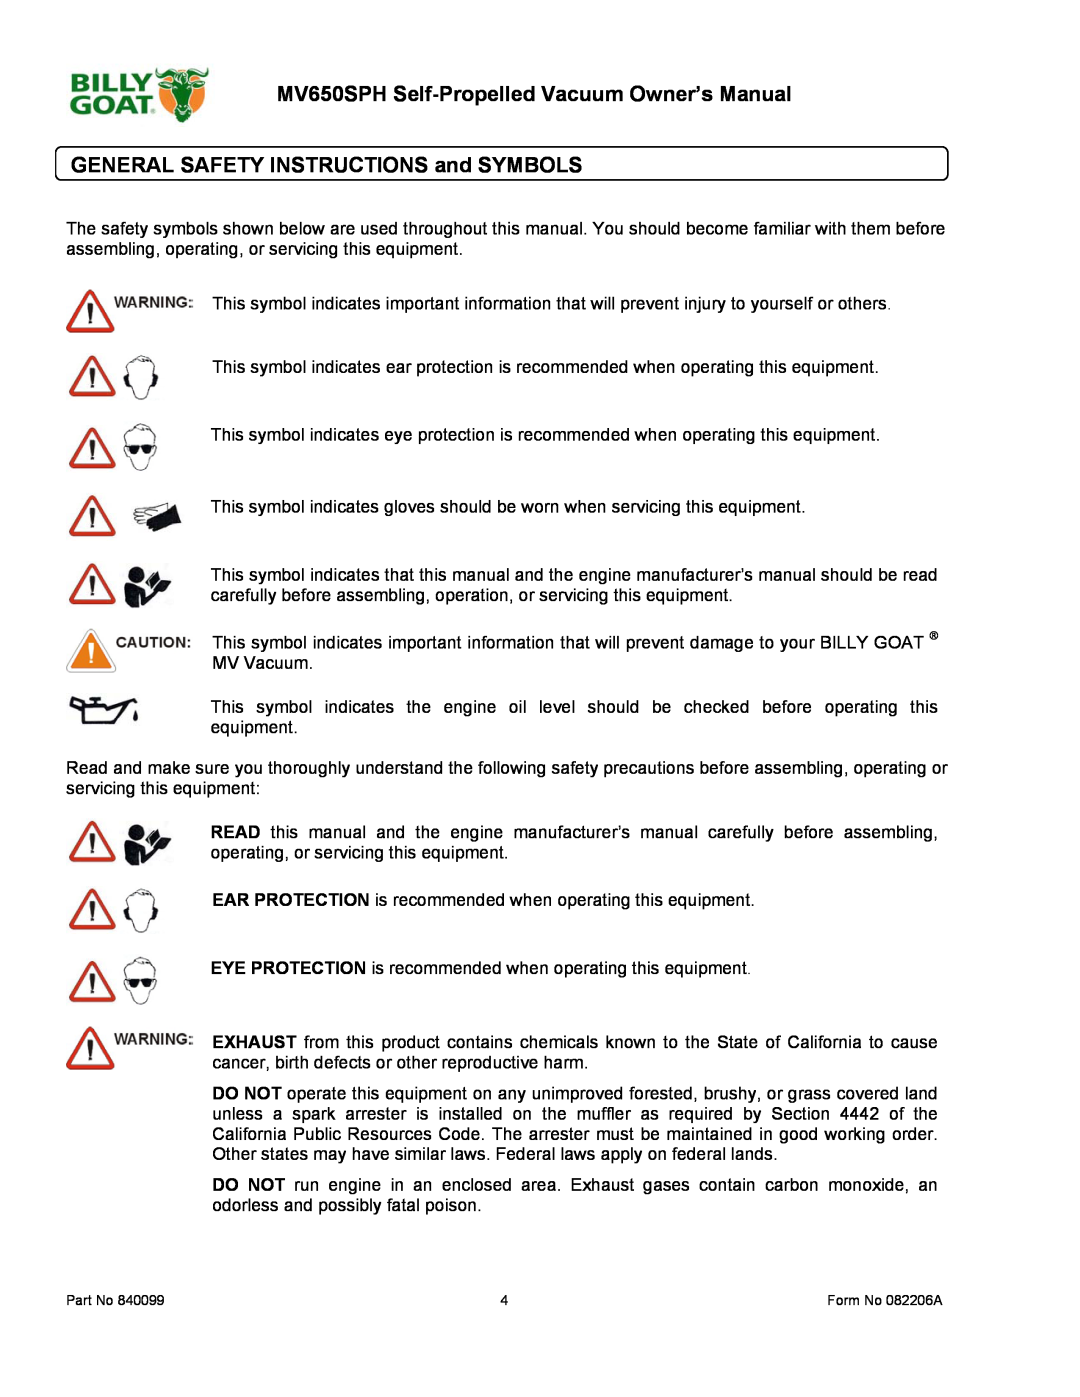 Billy Goat owner manual MV650SPH Self-Propelled Vacuum Owner’s Manual, GENERAL SAFETY INSTRUCTIONS and SYMBOLS 